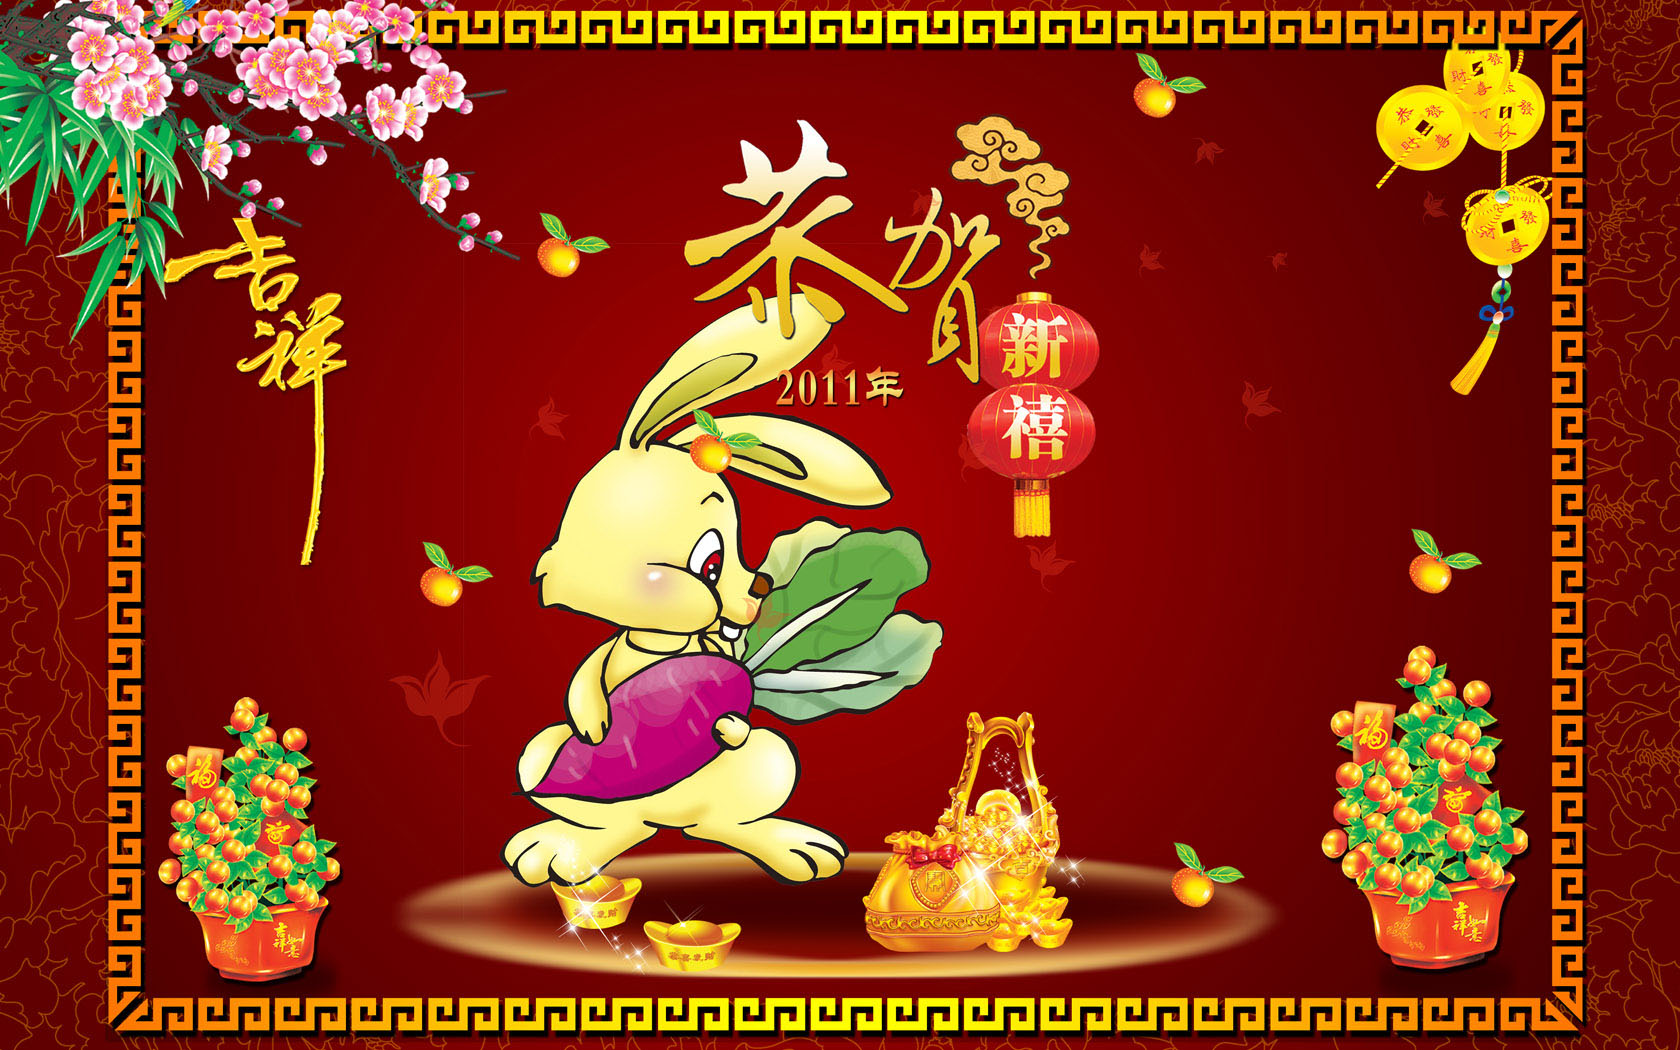 2011 New Year and Spring Festival computer desktop wallpaper